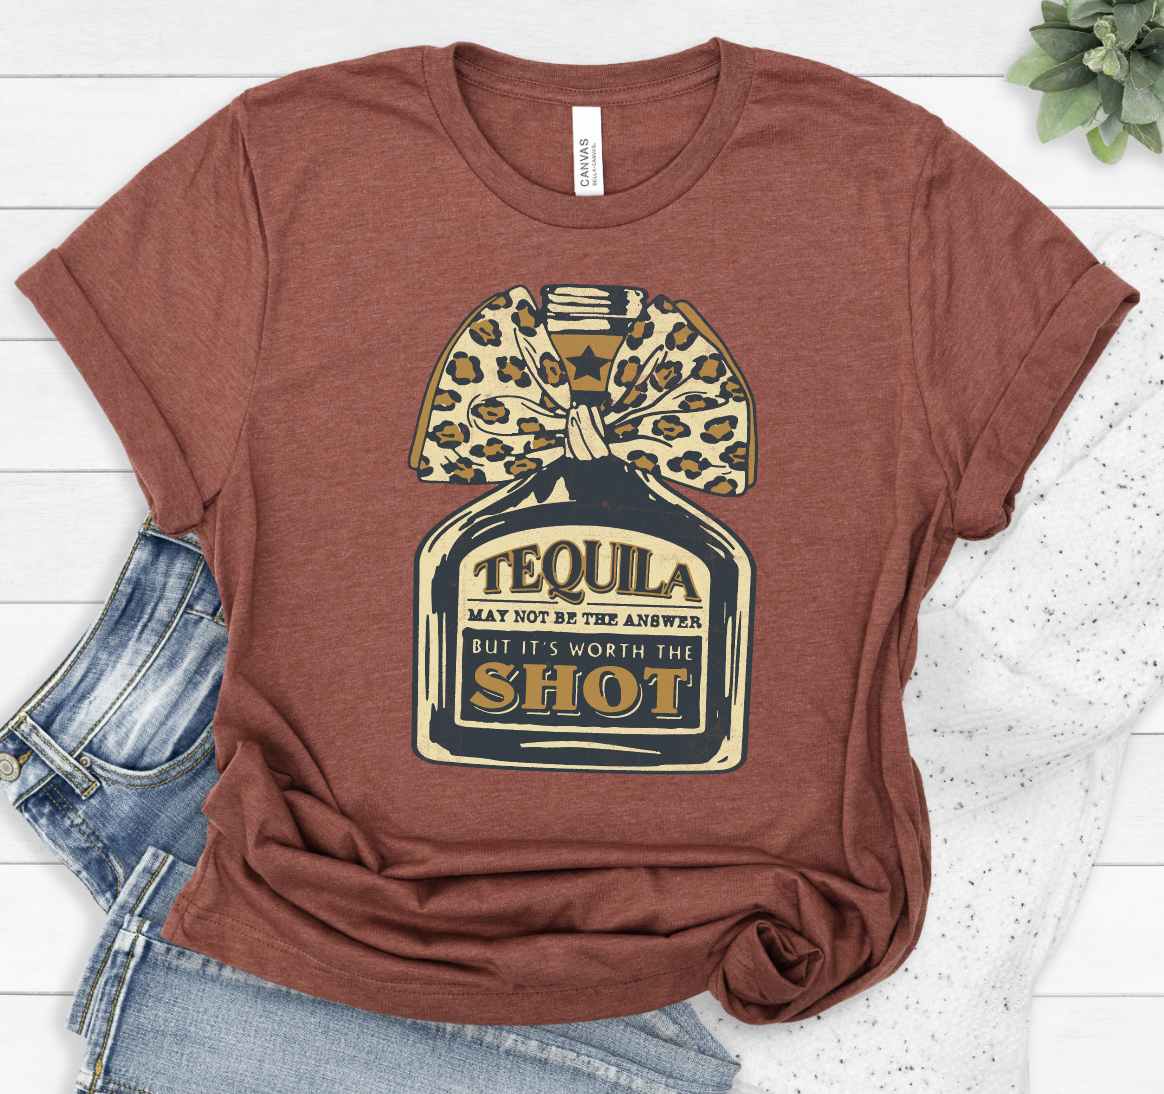 Tequila May Not Be The Answer